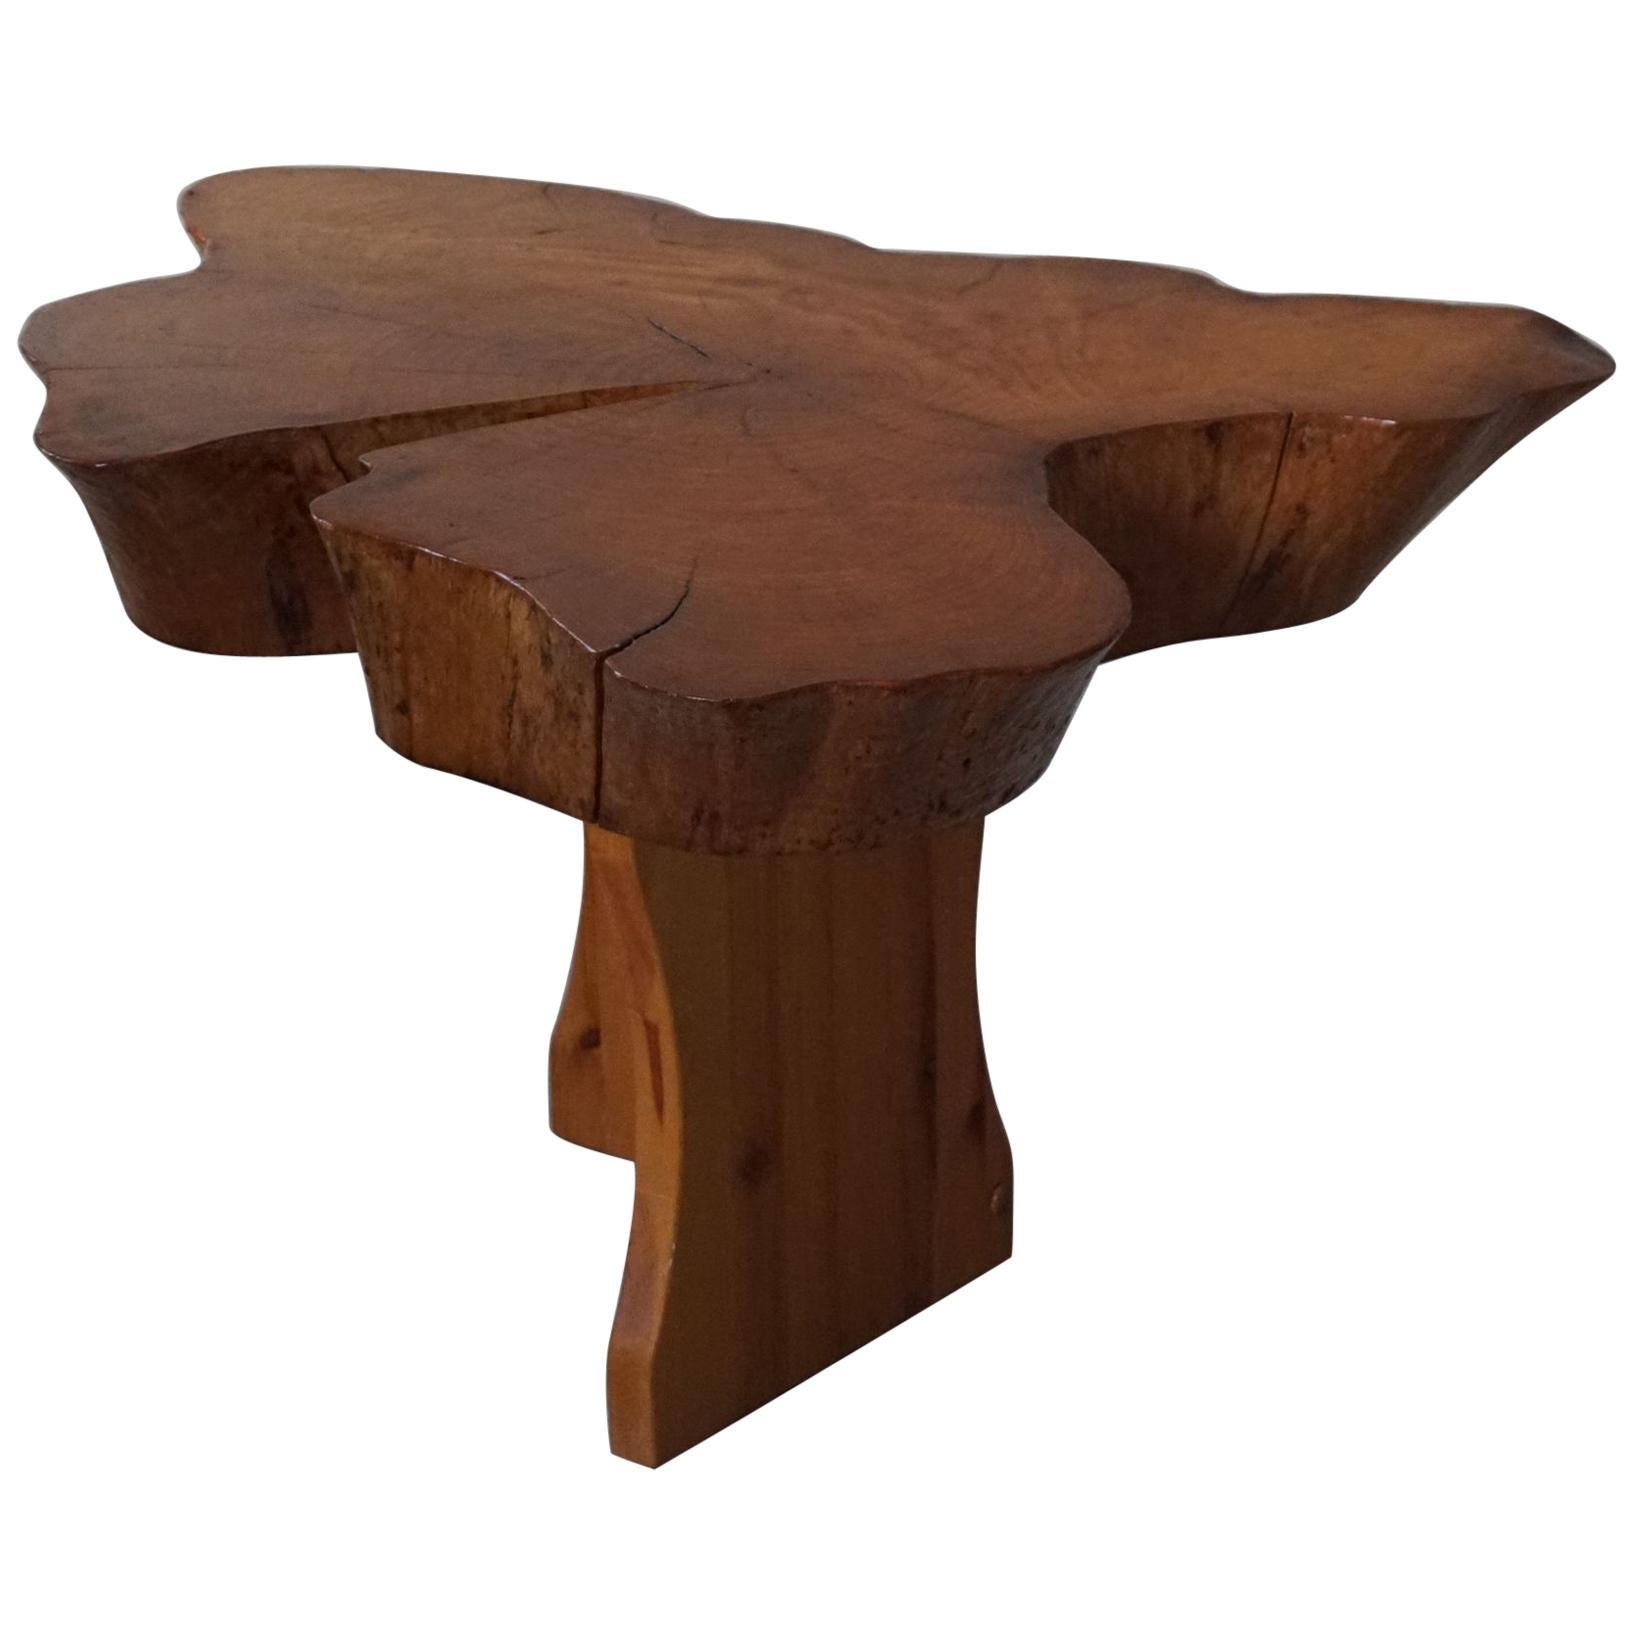 Decorative Coffee Table in Burl Wood, in the Style of George Nakashima, 1960s